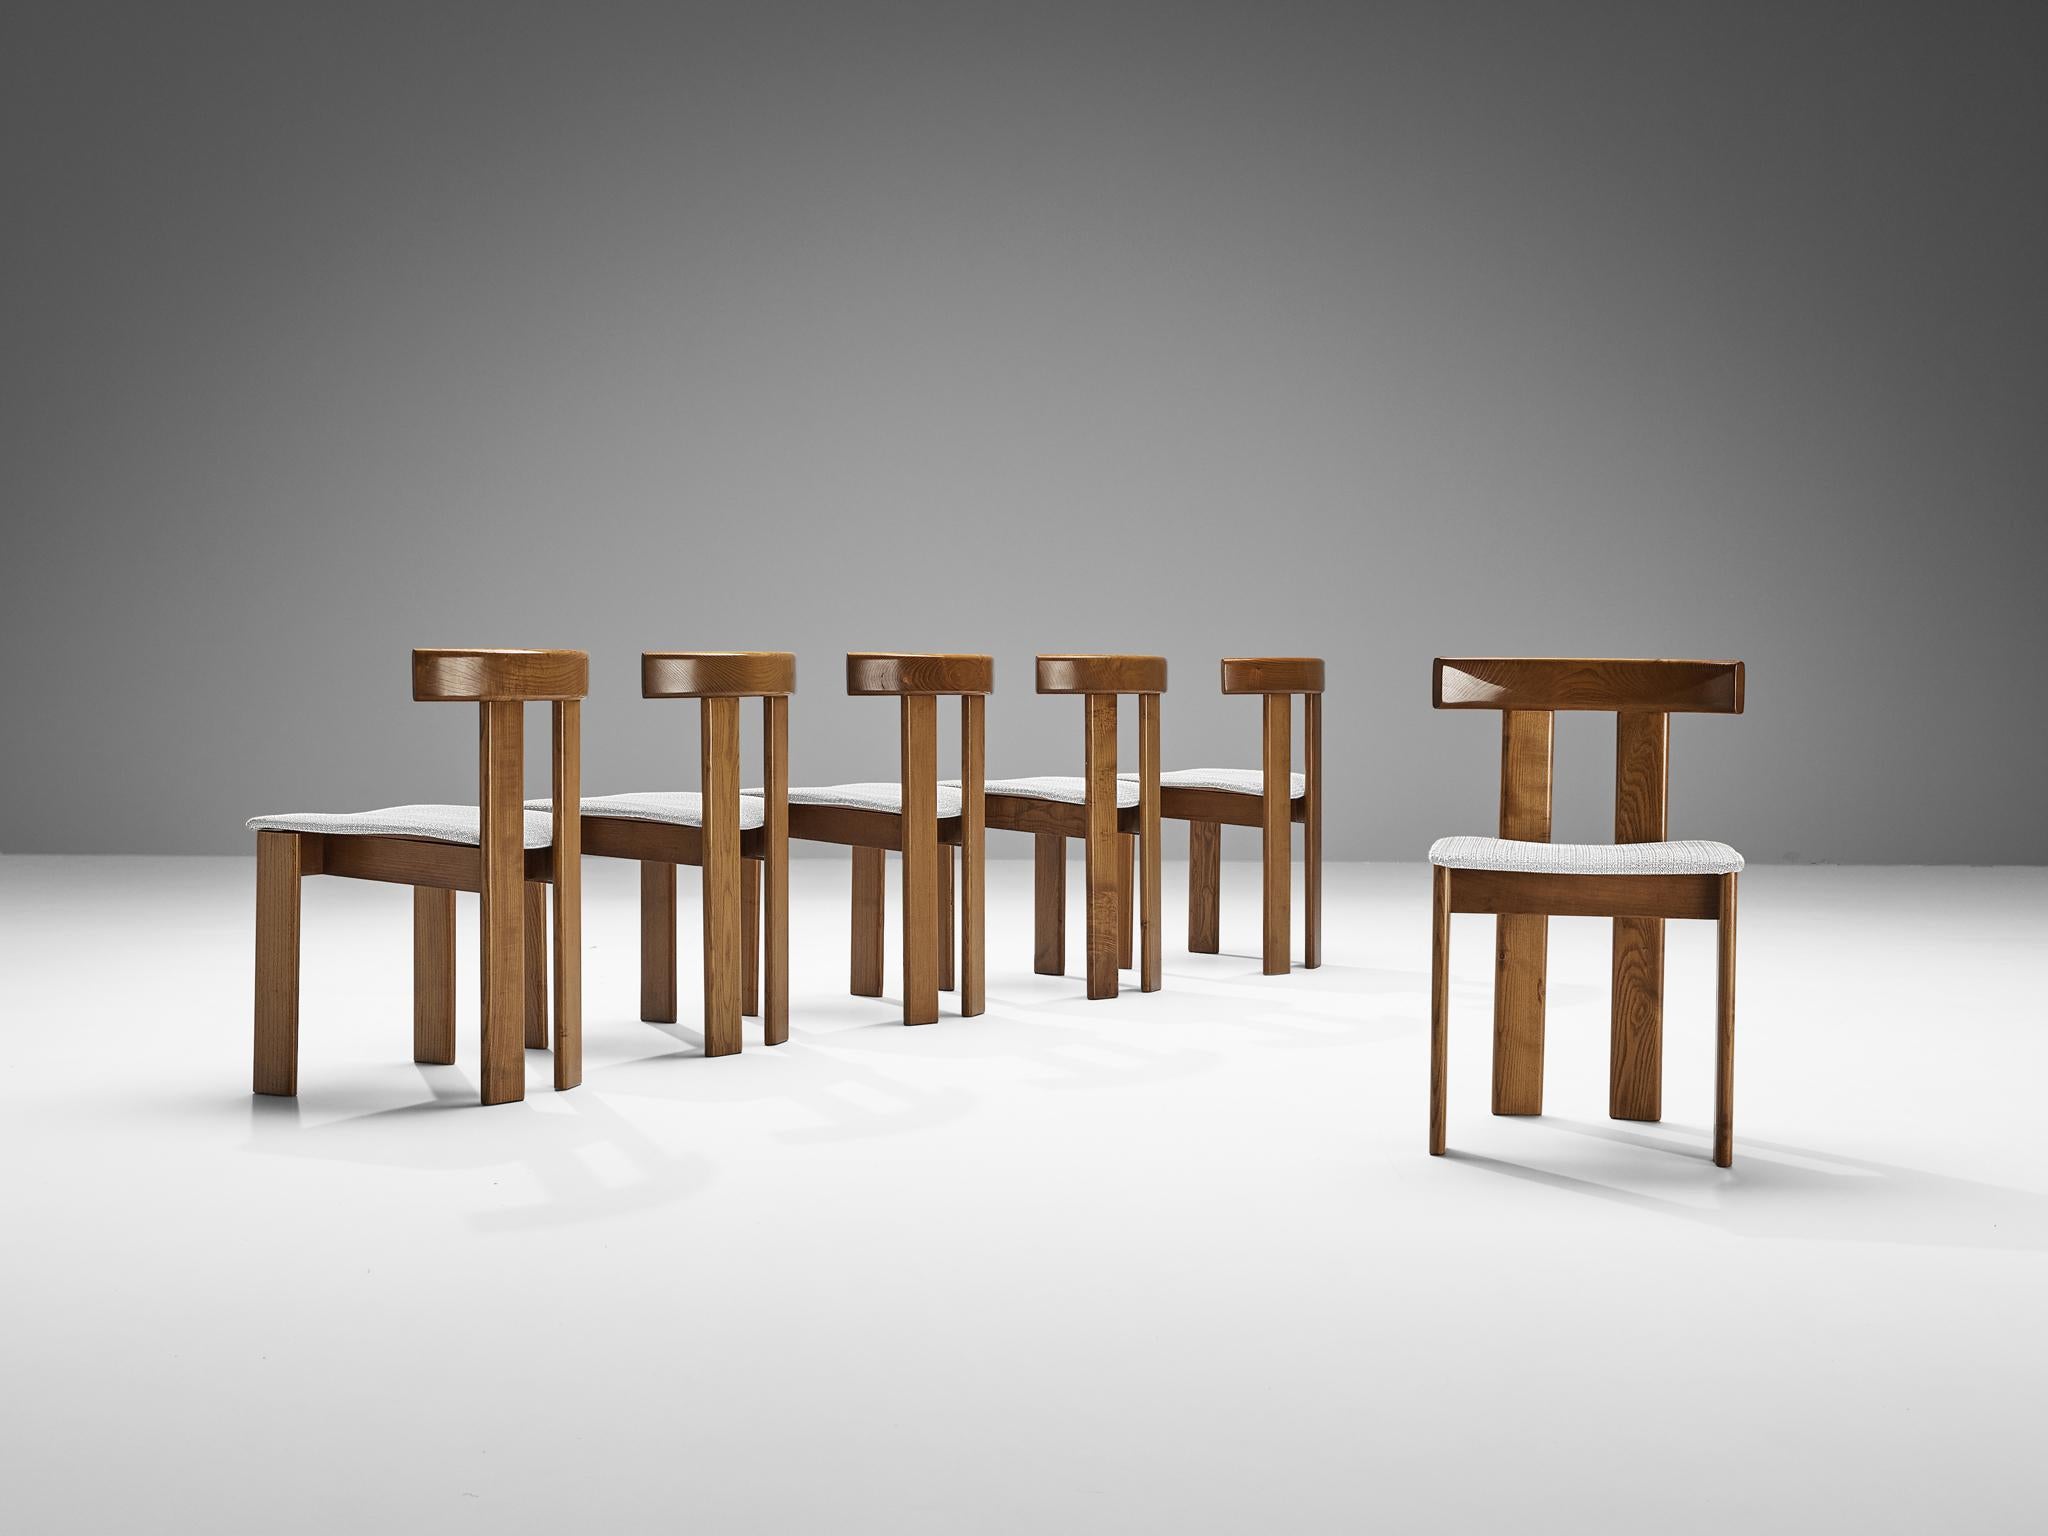 Luigi Vaghi for Former, set of six dining chairs, stained ash, white fabric, Italy, 1960s. 

A characteristic 'T-chair' design; simplistic yet very strong in lines and proportions. Wonderful dynamic frame executed in ash, whereby the rear legs are